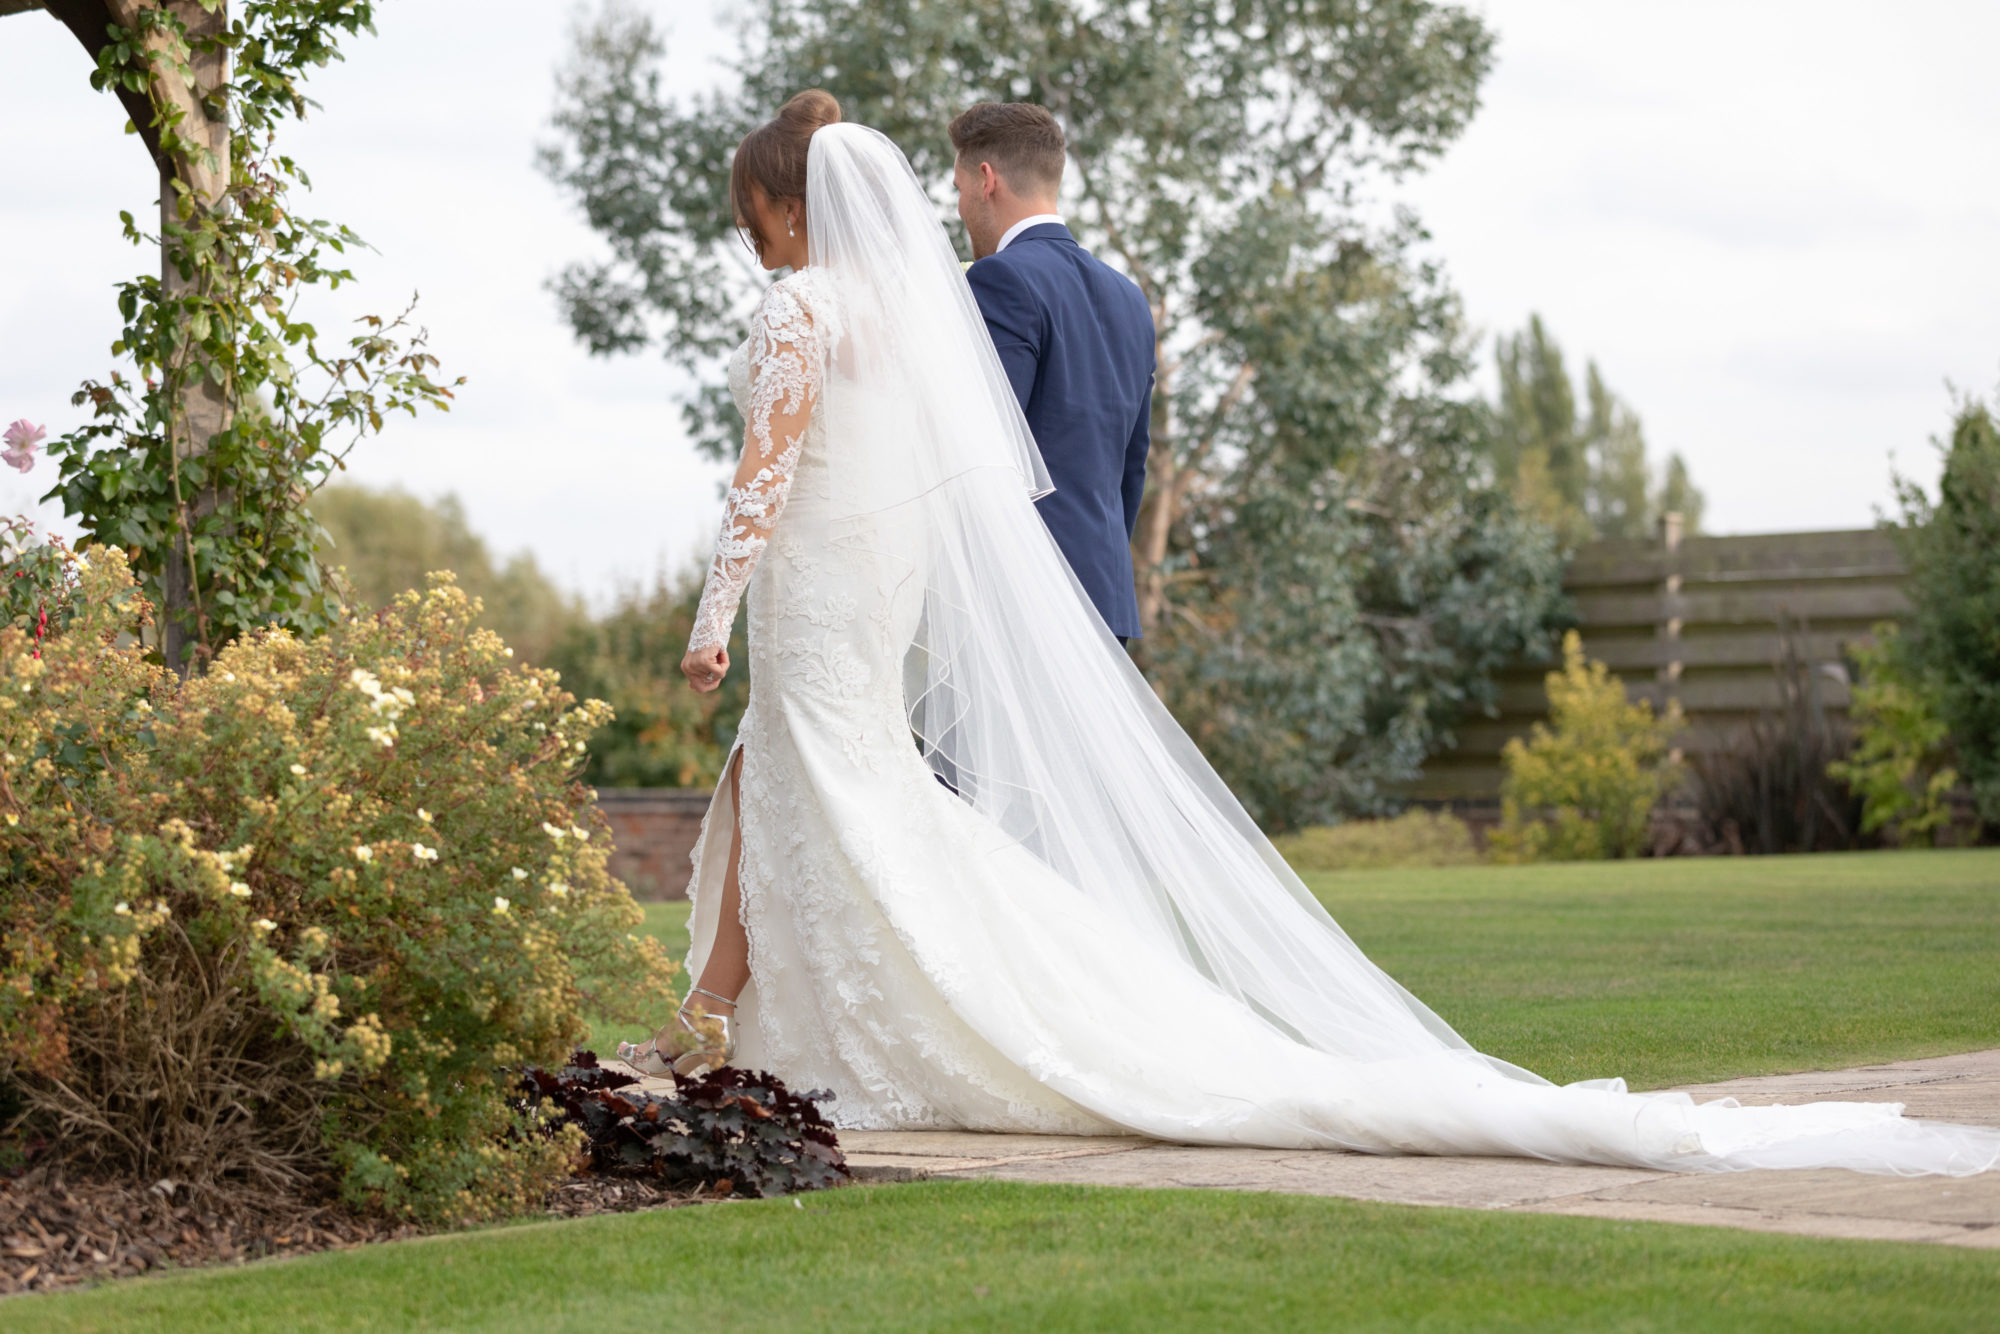 bridal groom candid natural wedding photography s urwin oxfordshire photographer